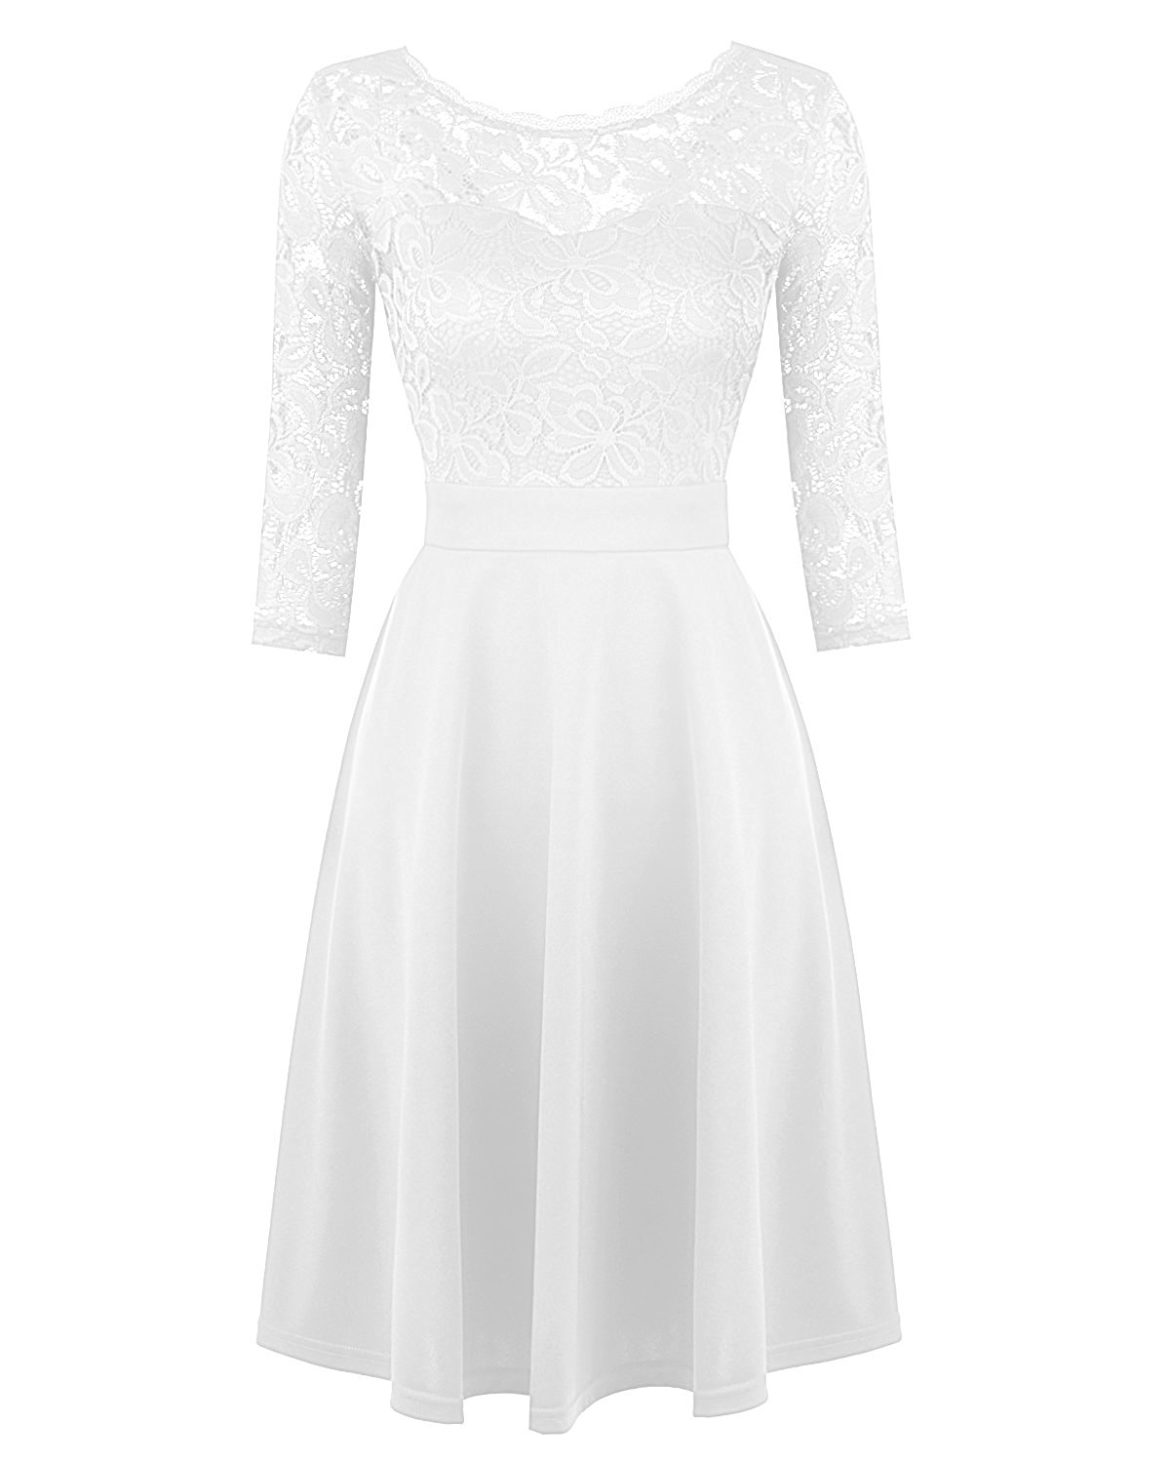 Mixfeer Women’s Vintage Floral Lace Cocktail Swing Dress With 3/4 ...